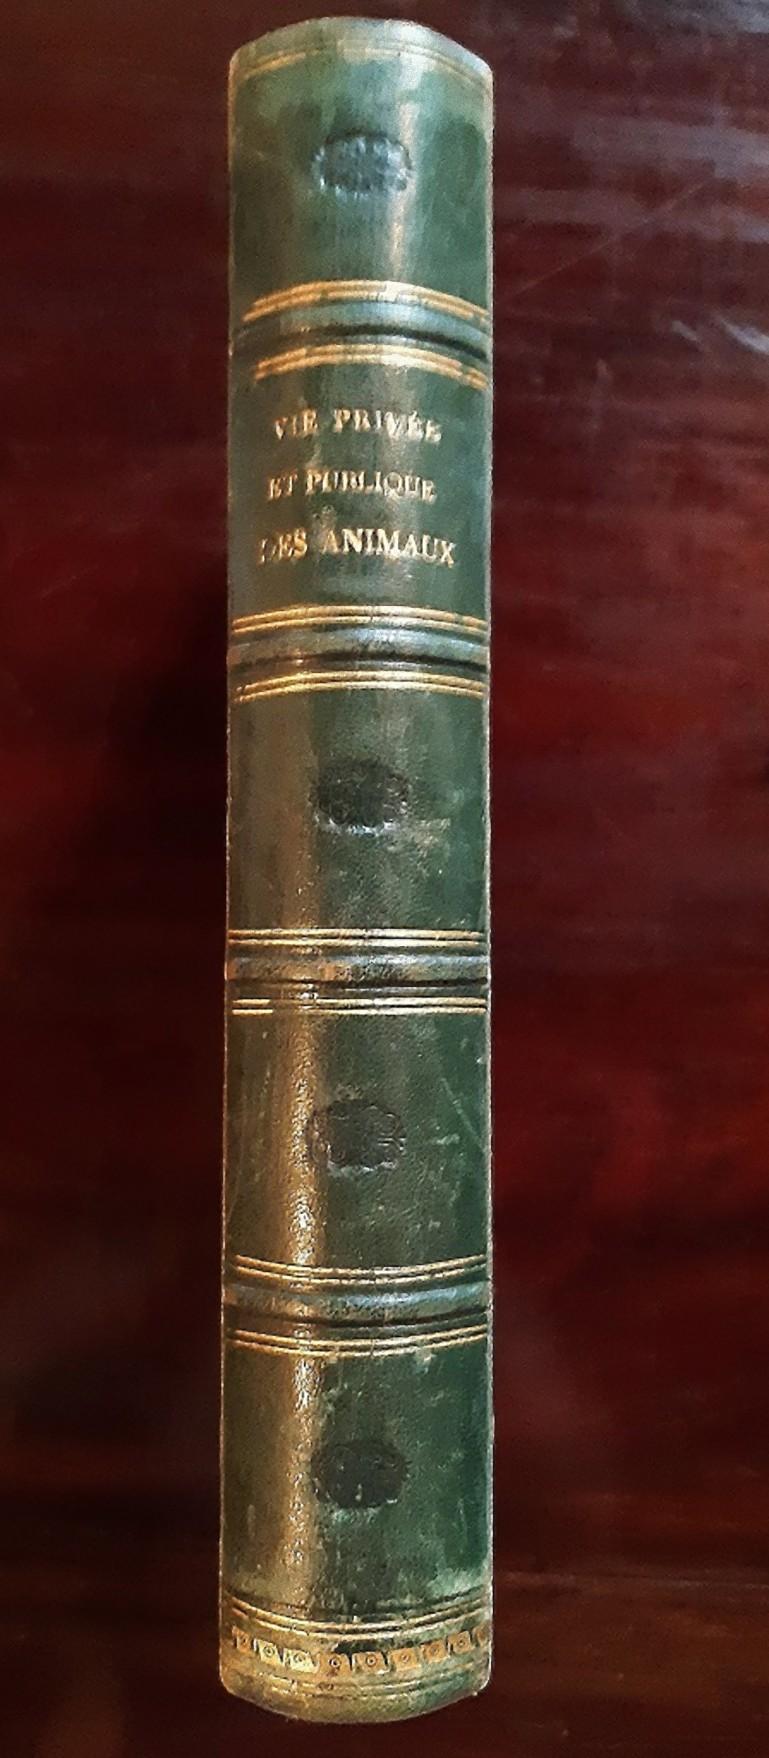 Vie Privée et Publique des Animaux is an original modern rare book engraved by Jean Jeacques Grandville (Nancy, 1803 – Vanves, 1847) and written by Various Authors in 1868.

Original First Edition.

Published by Hetzel, Paris.

Format:in 4°.

The